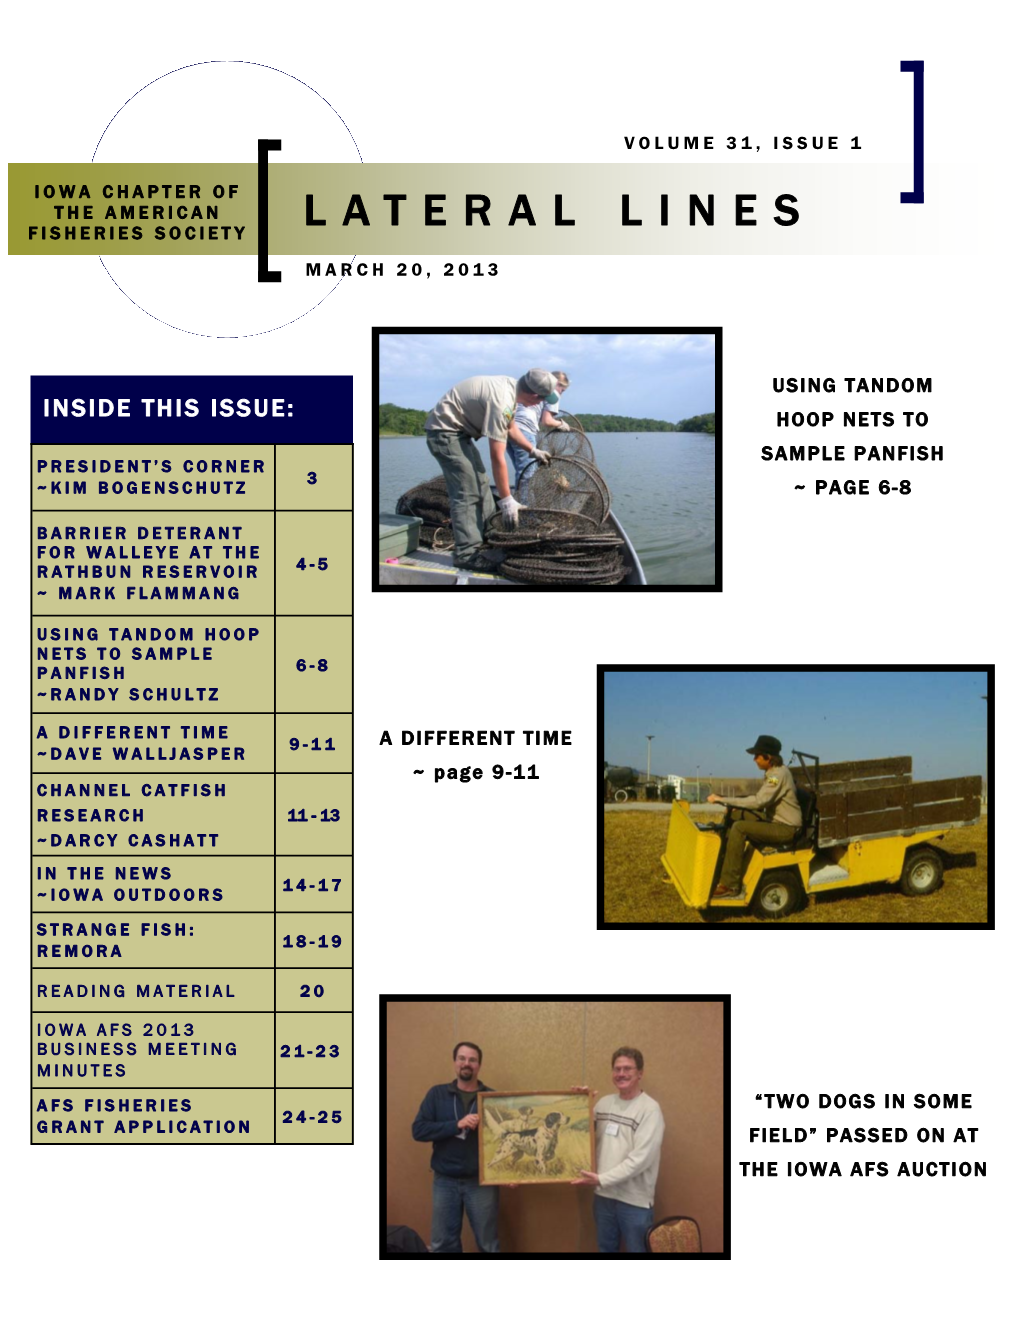 2013 Lateral Lines Volume 31 Number